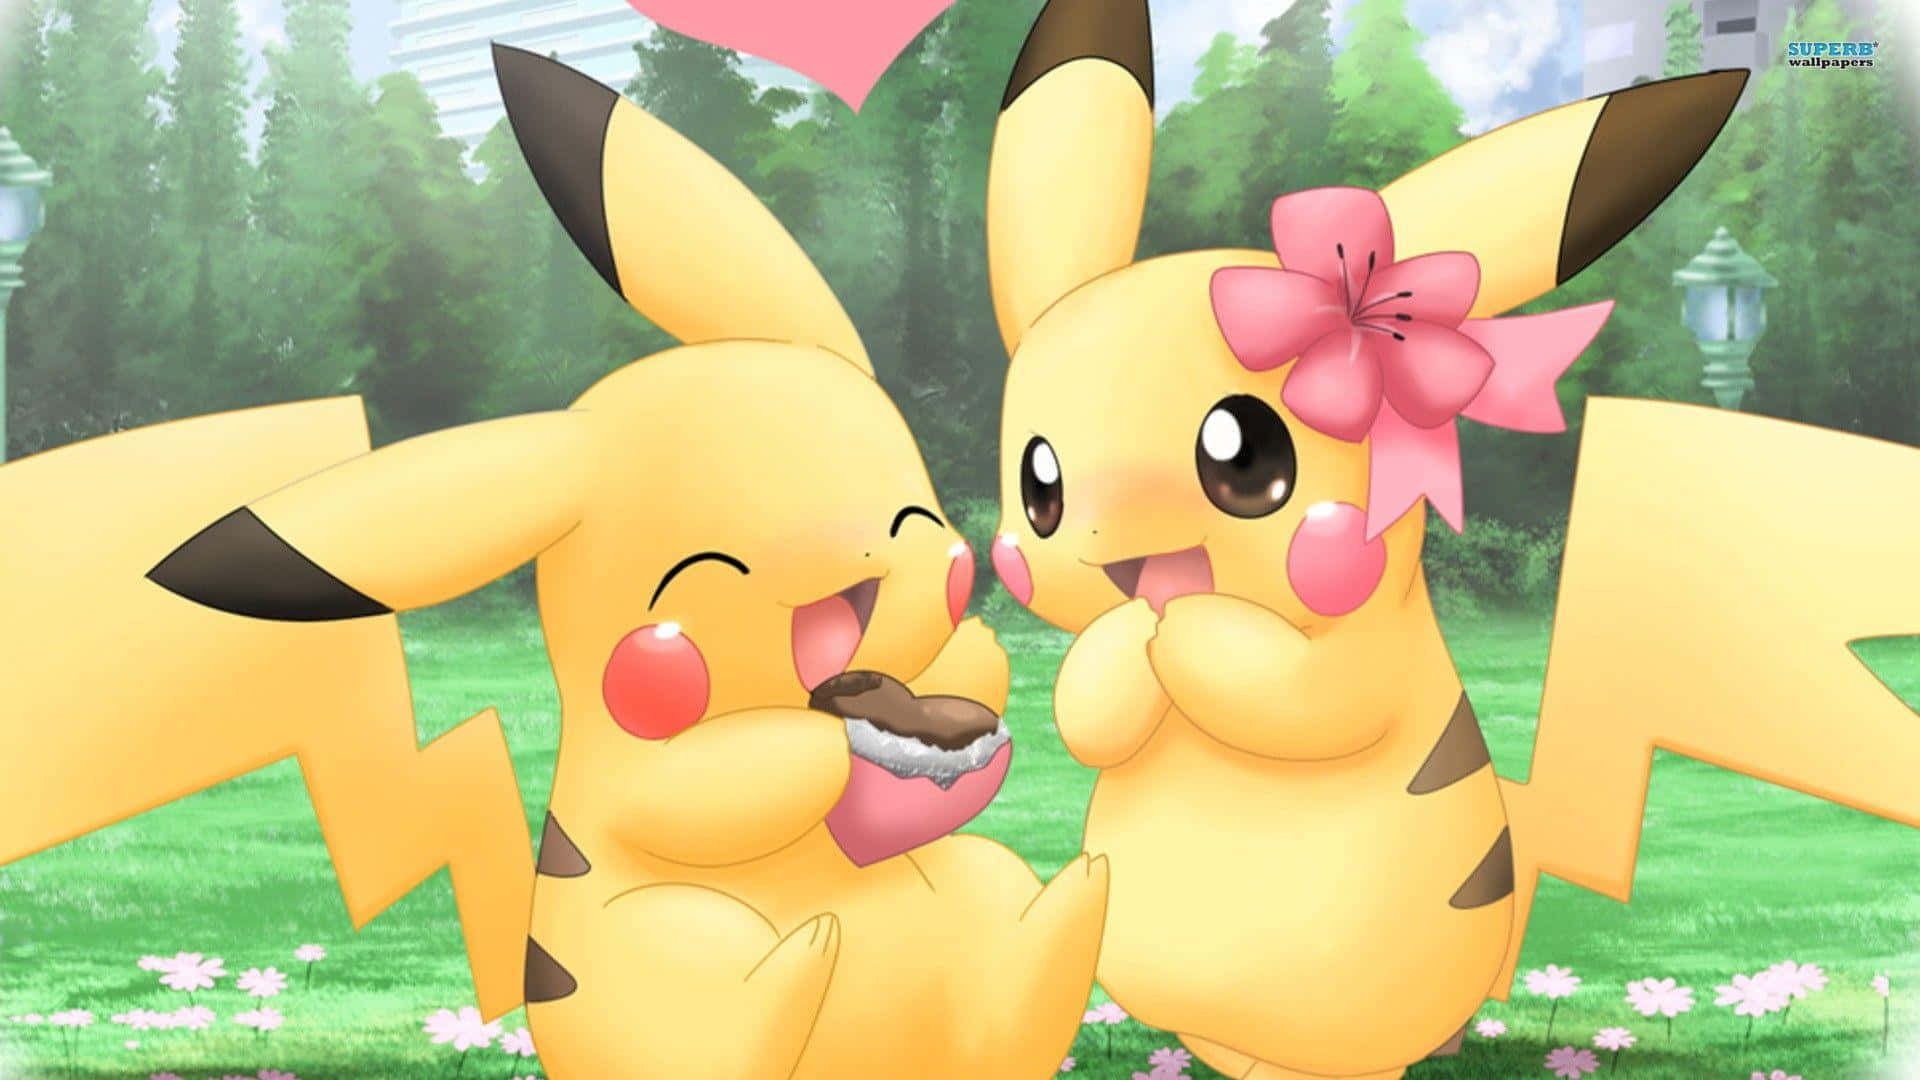 Two of the Cutest Pokémon - Pikachu and Eevee Wallpaper